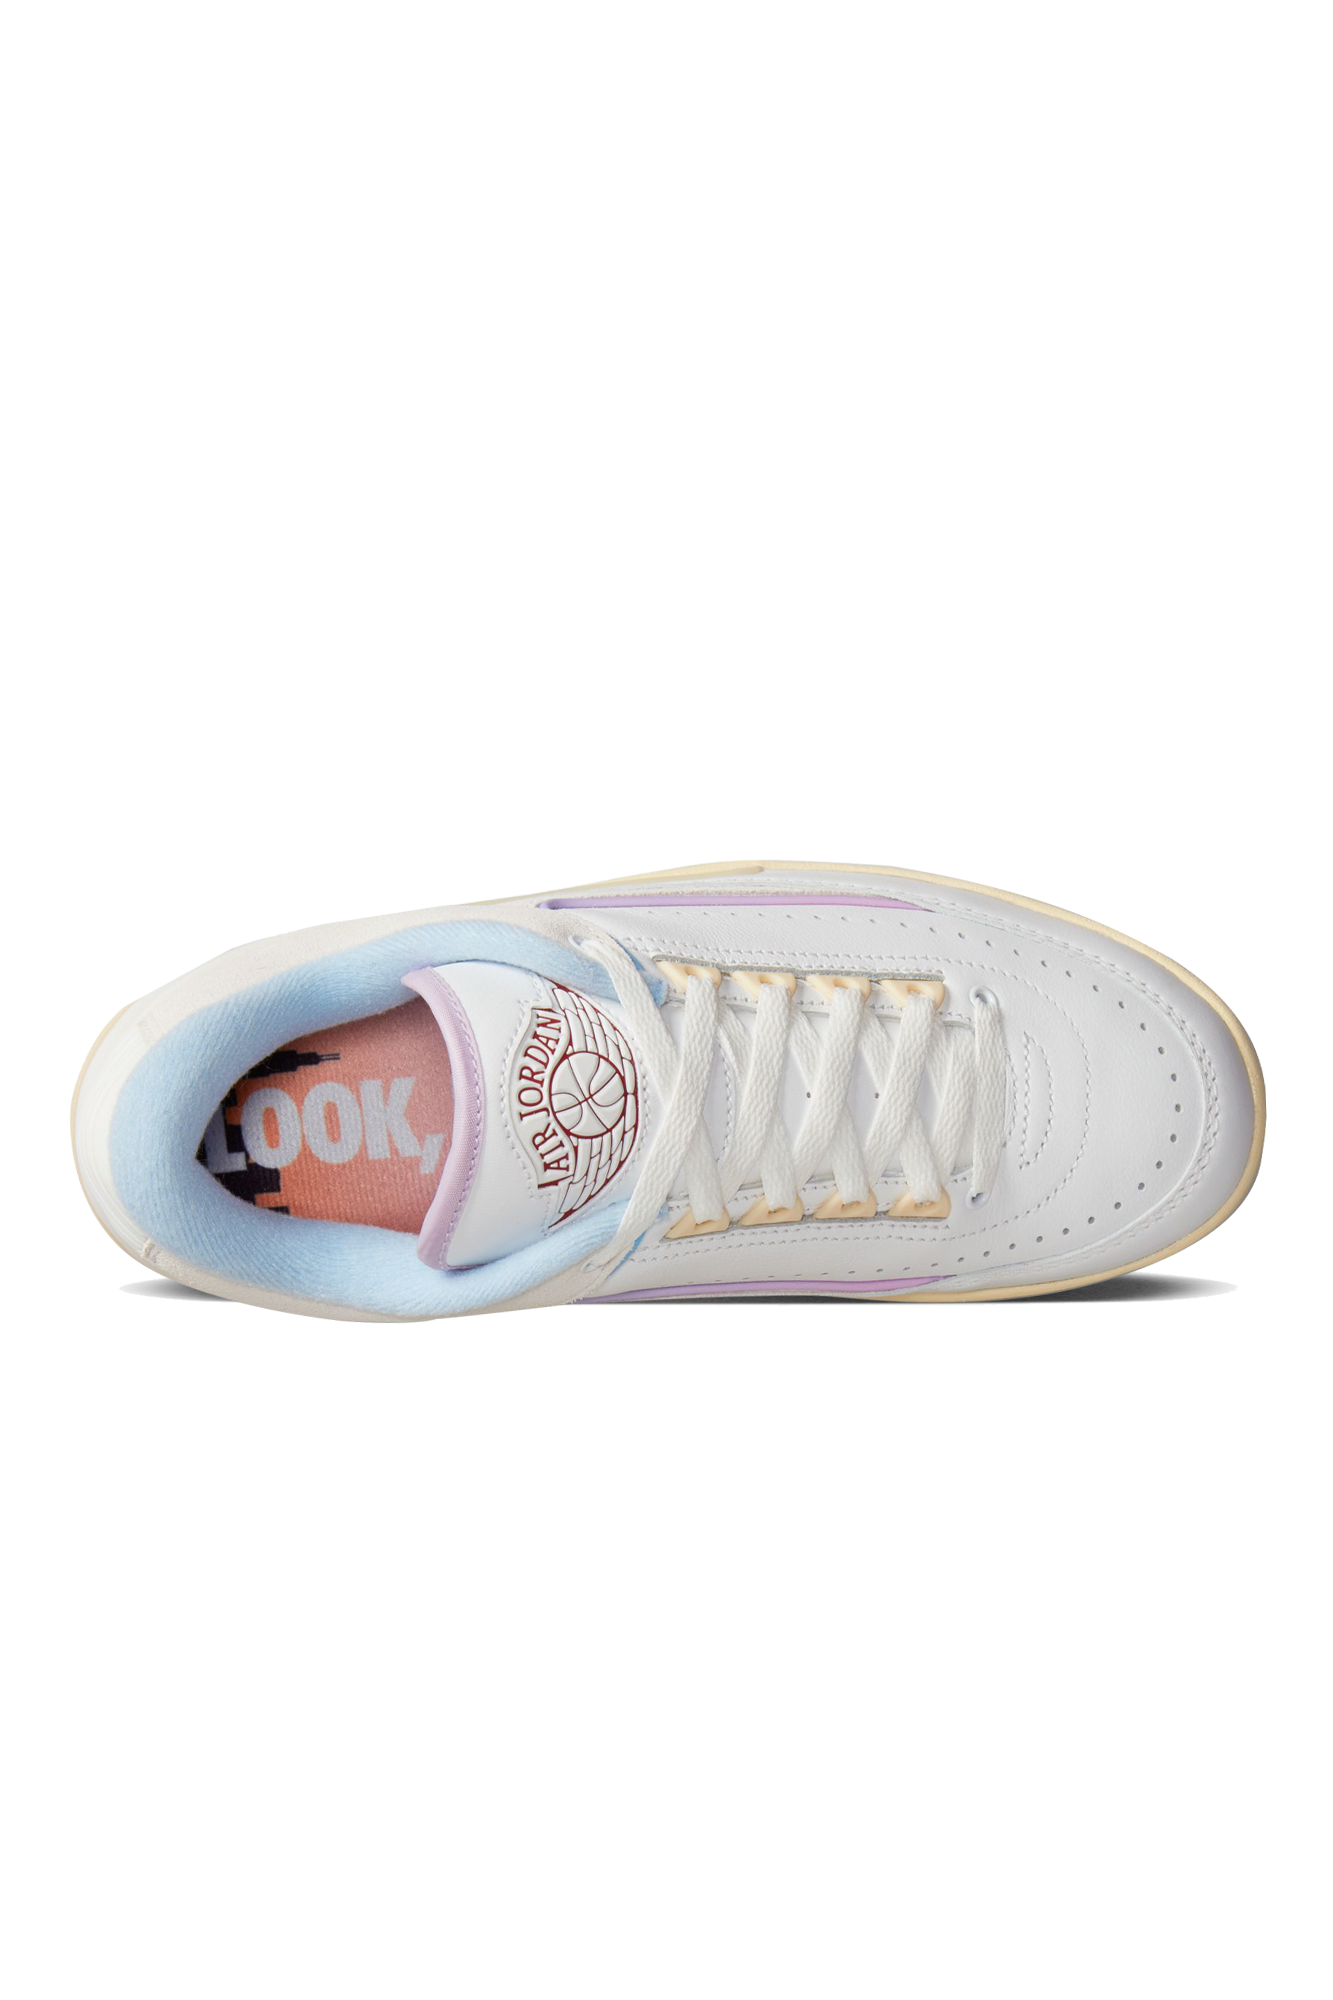 W 2 Retro Low "Look Up In The Air"